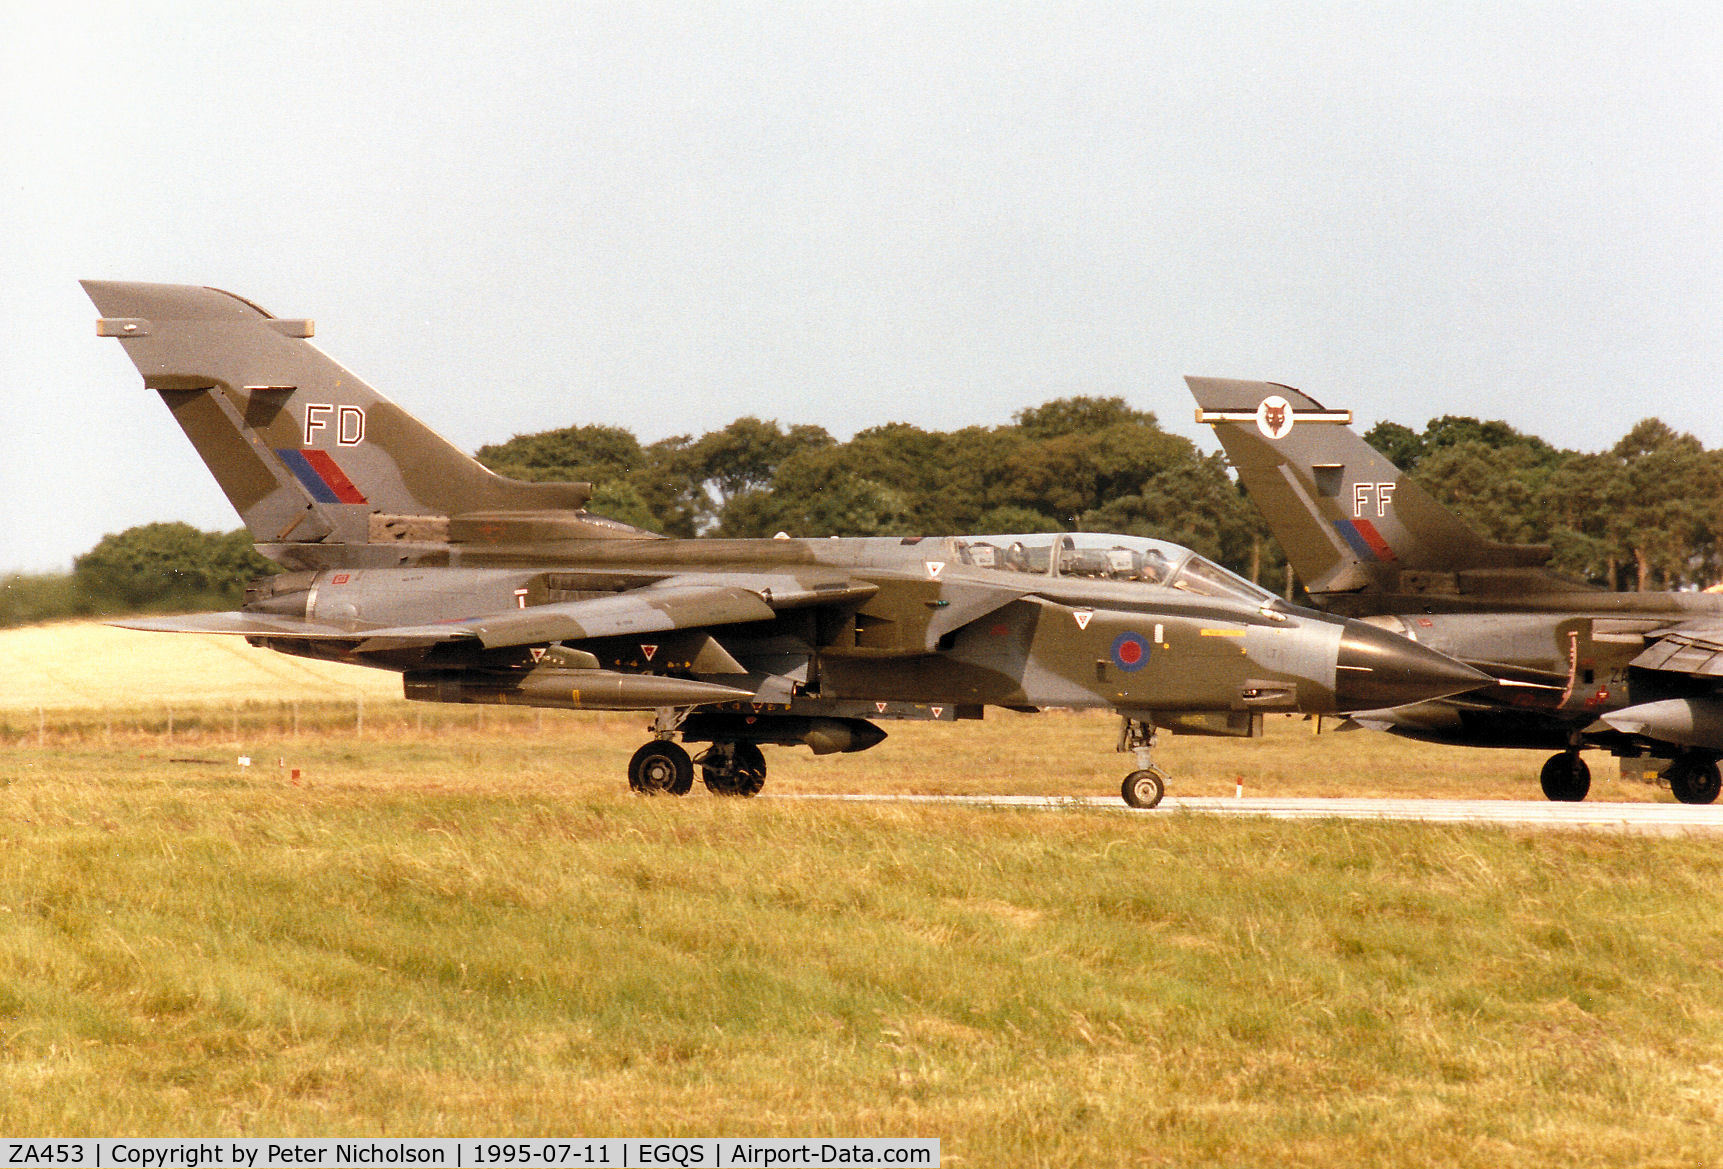 ZA453, 1983 Panavia Tornado GR.1B C/N BS083/249/3119, Tornado GR.1B of 12 Squadron joining the active runway at RAF Lossiemouth in the Summer of 1995.